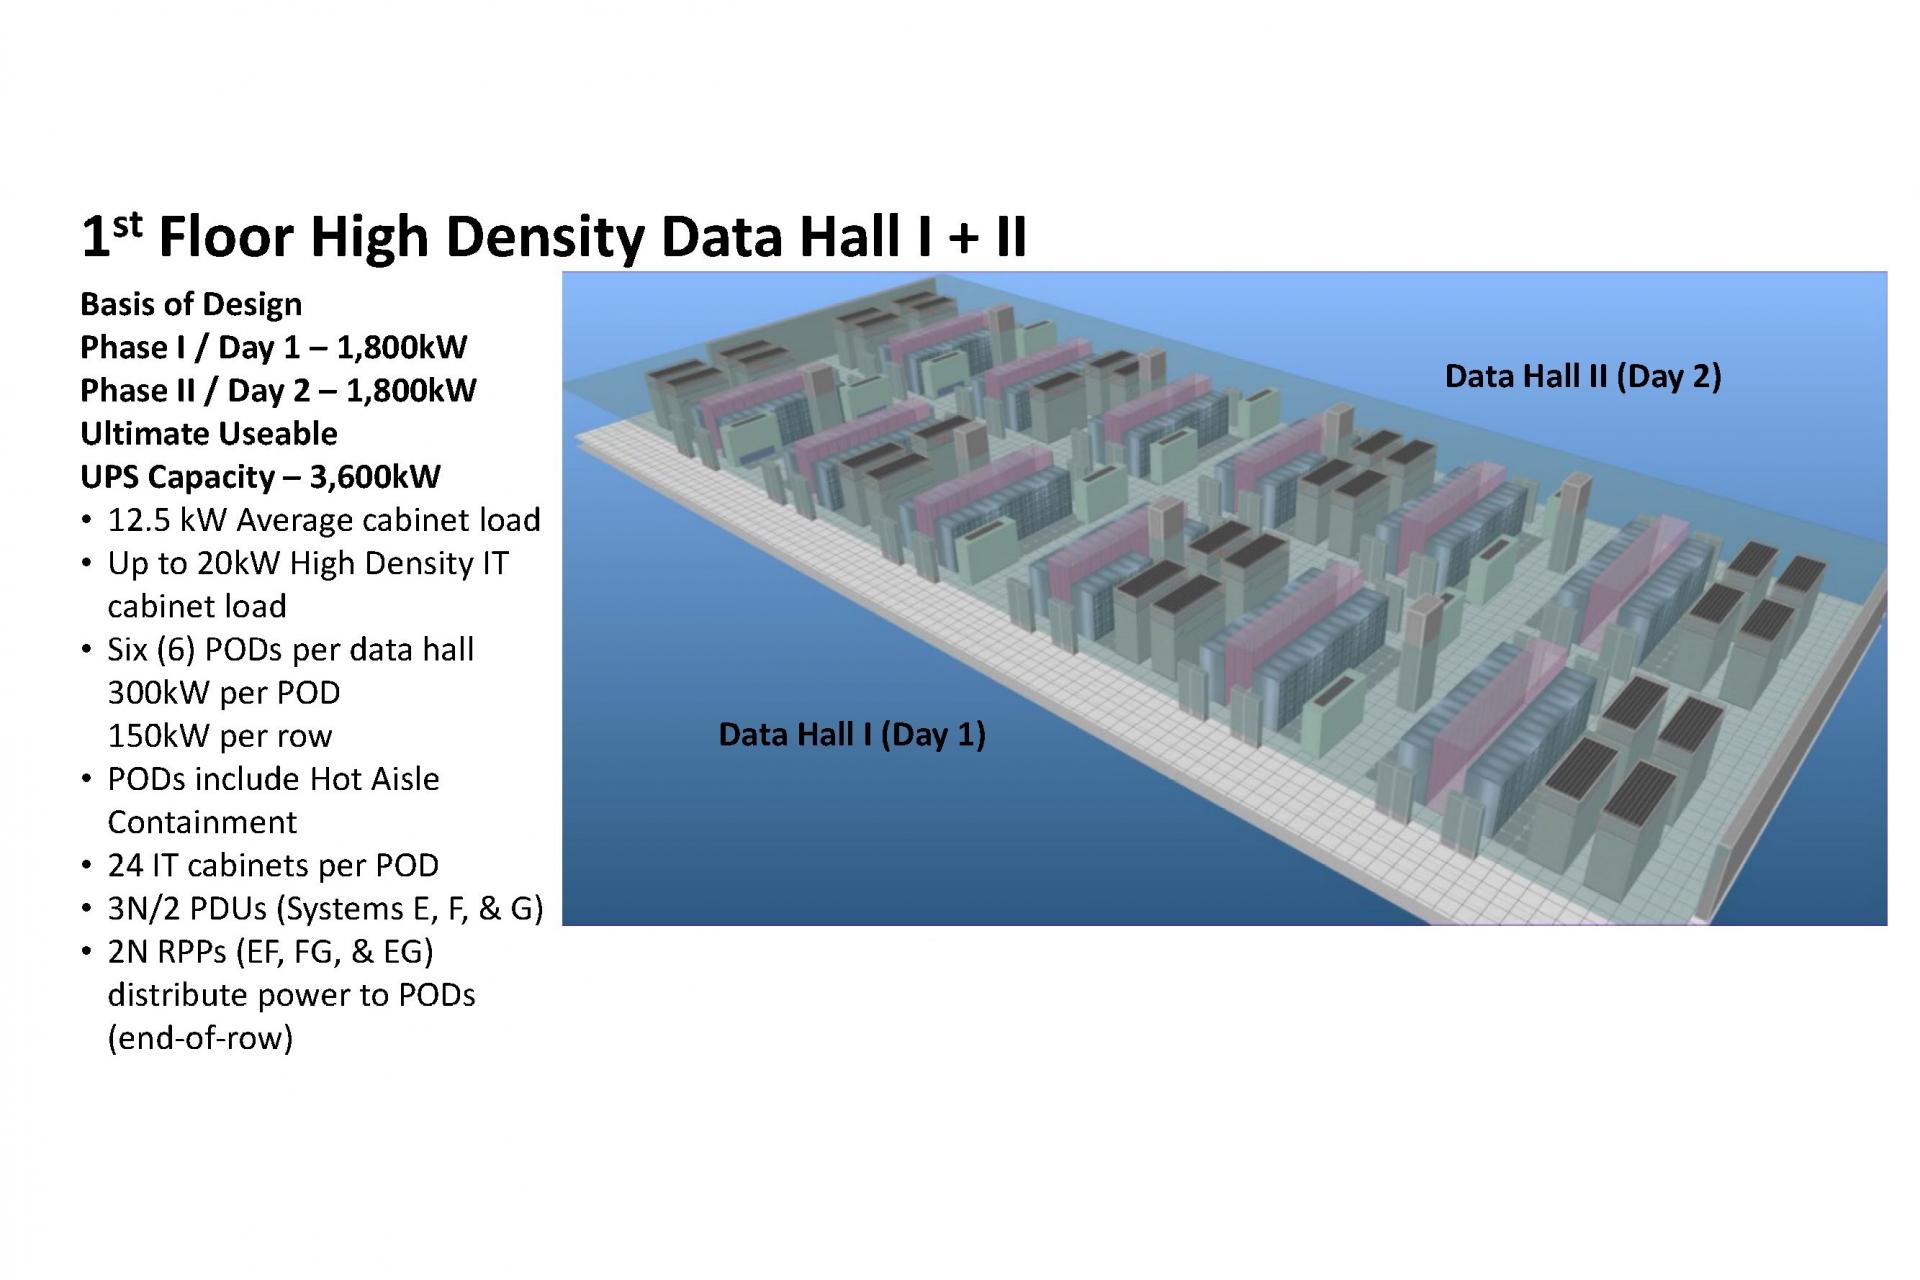 3-D model of the data center provides insight into the design and layout of the key mechanical (CRAHs), electrical (PDUs and RPPs), and production equipment 